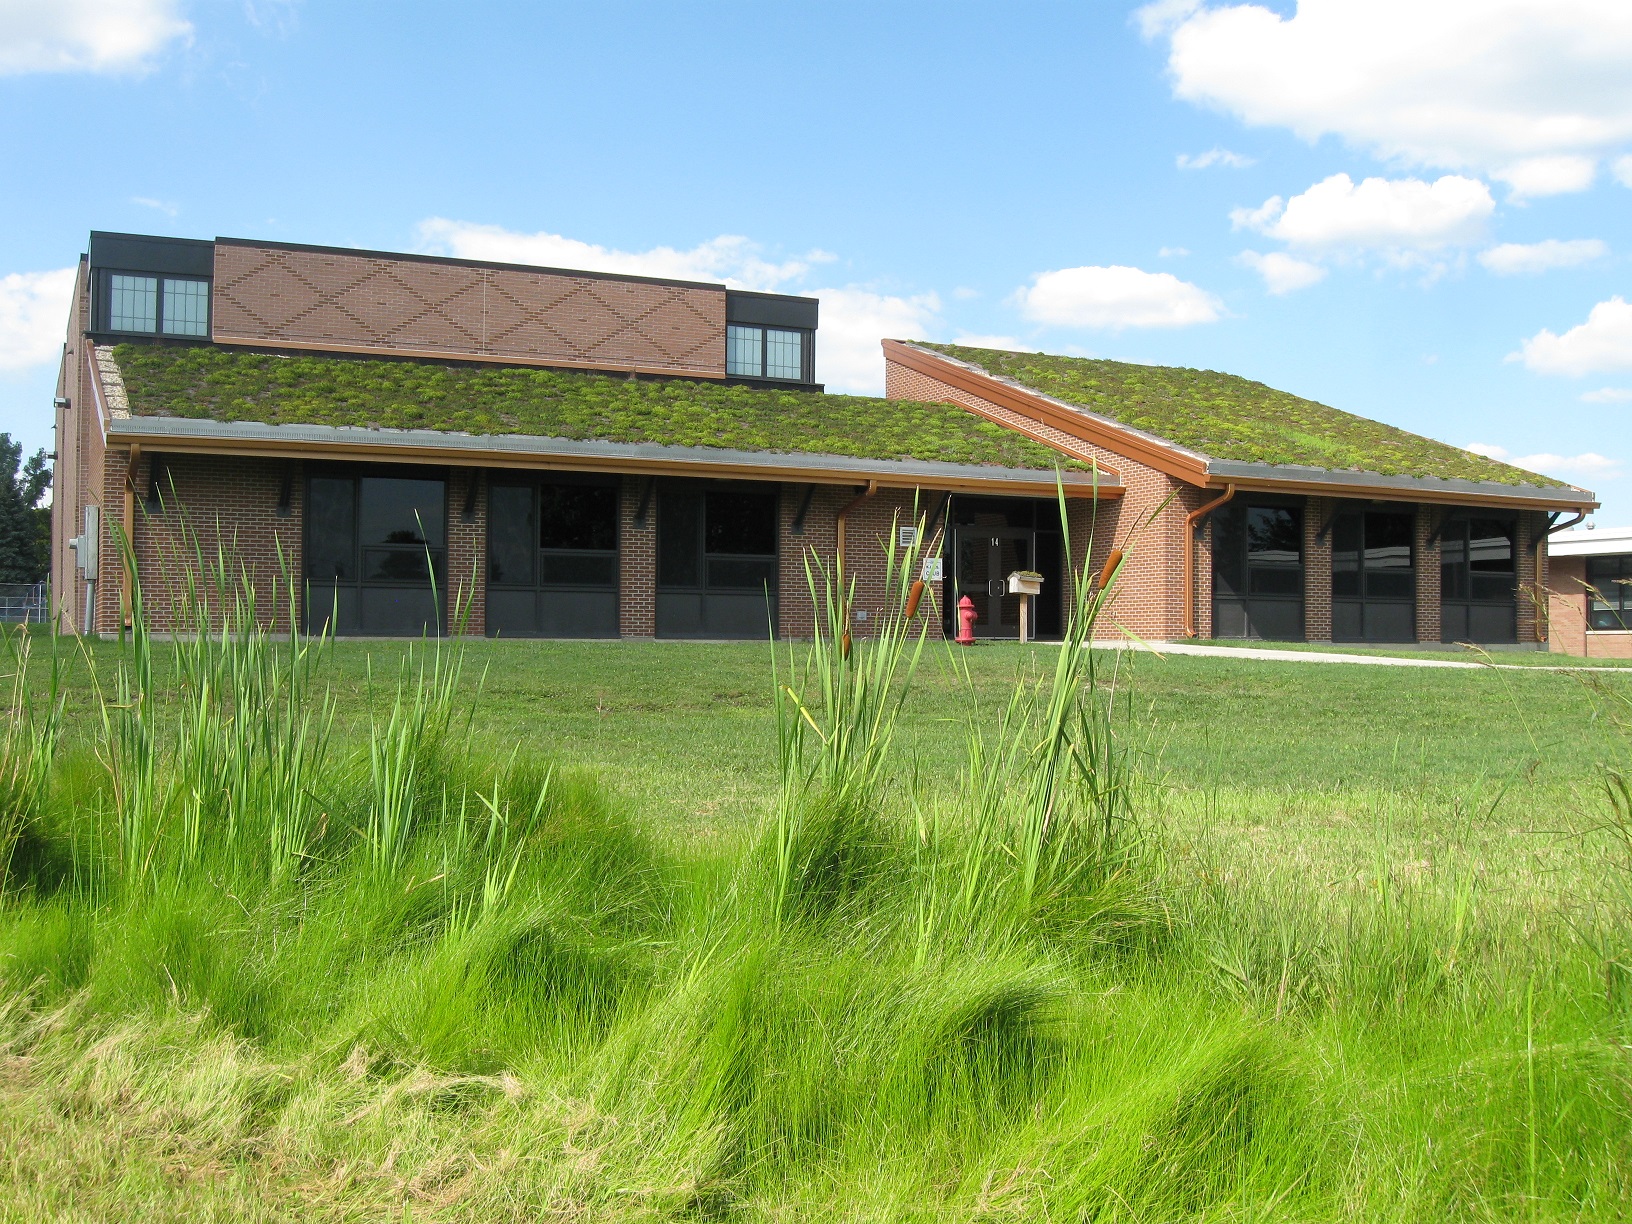 Steeply pitched green roof